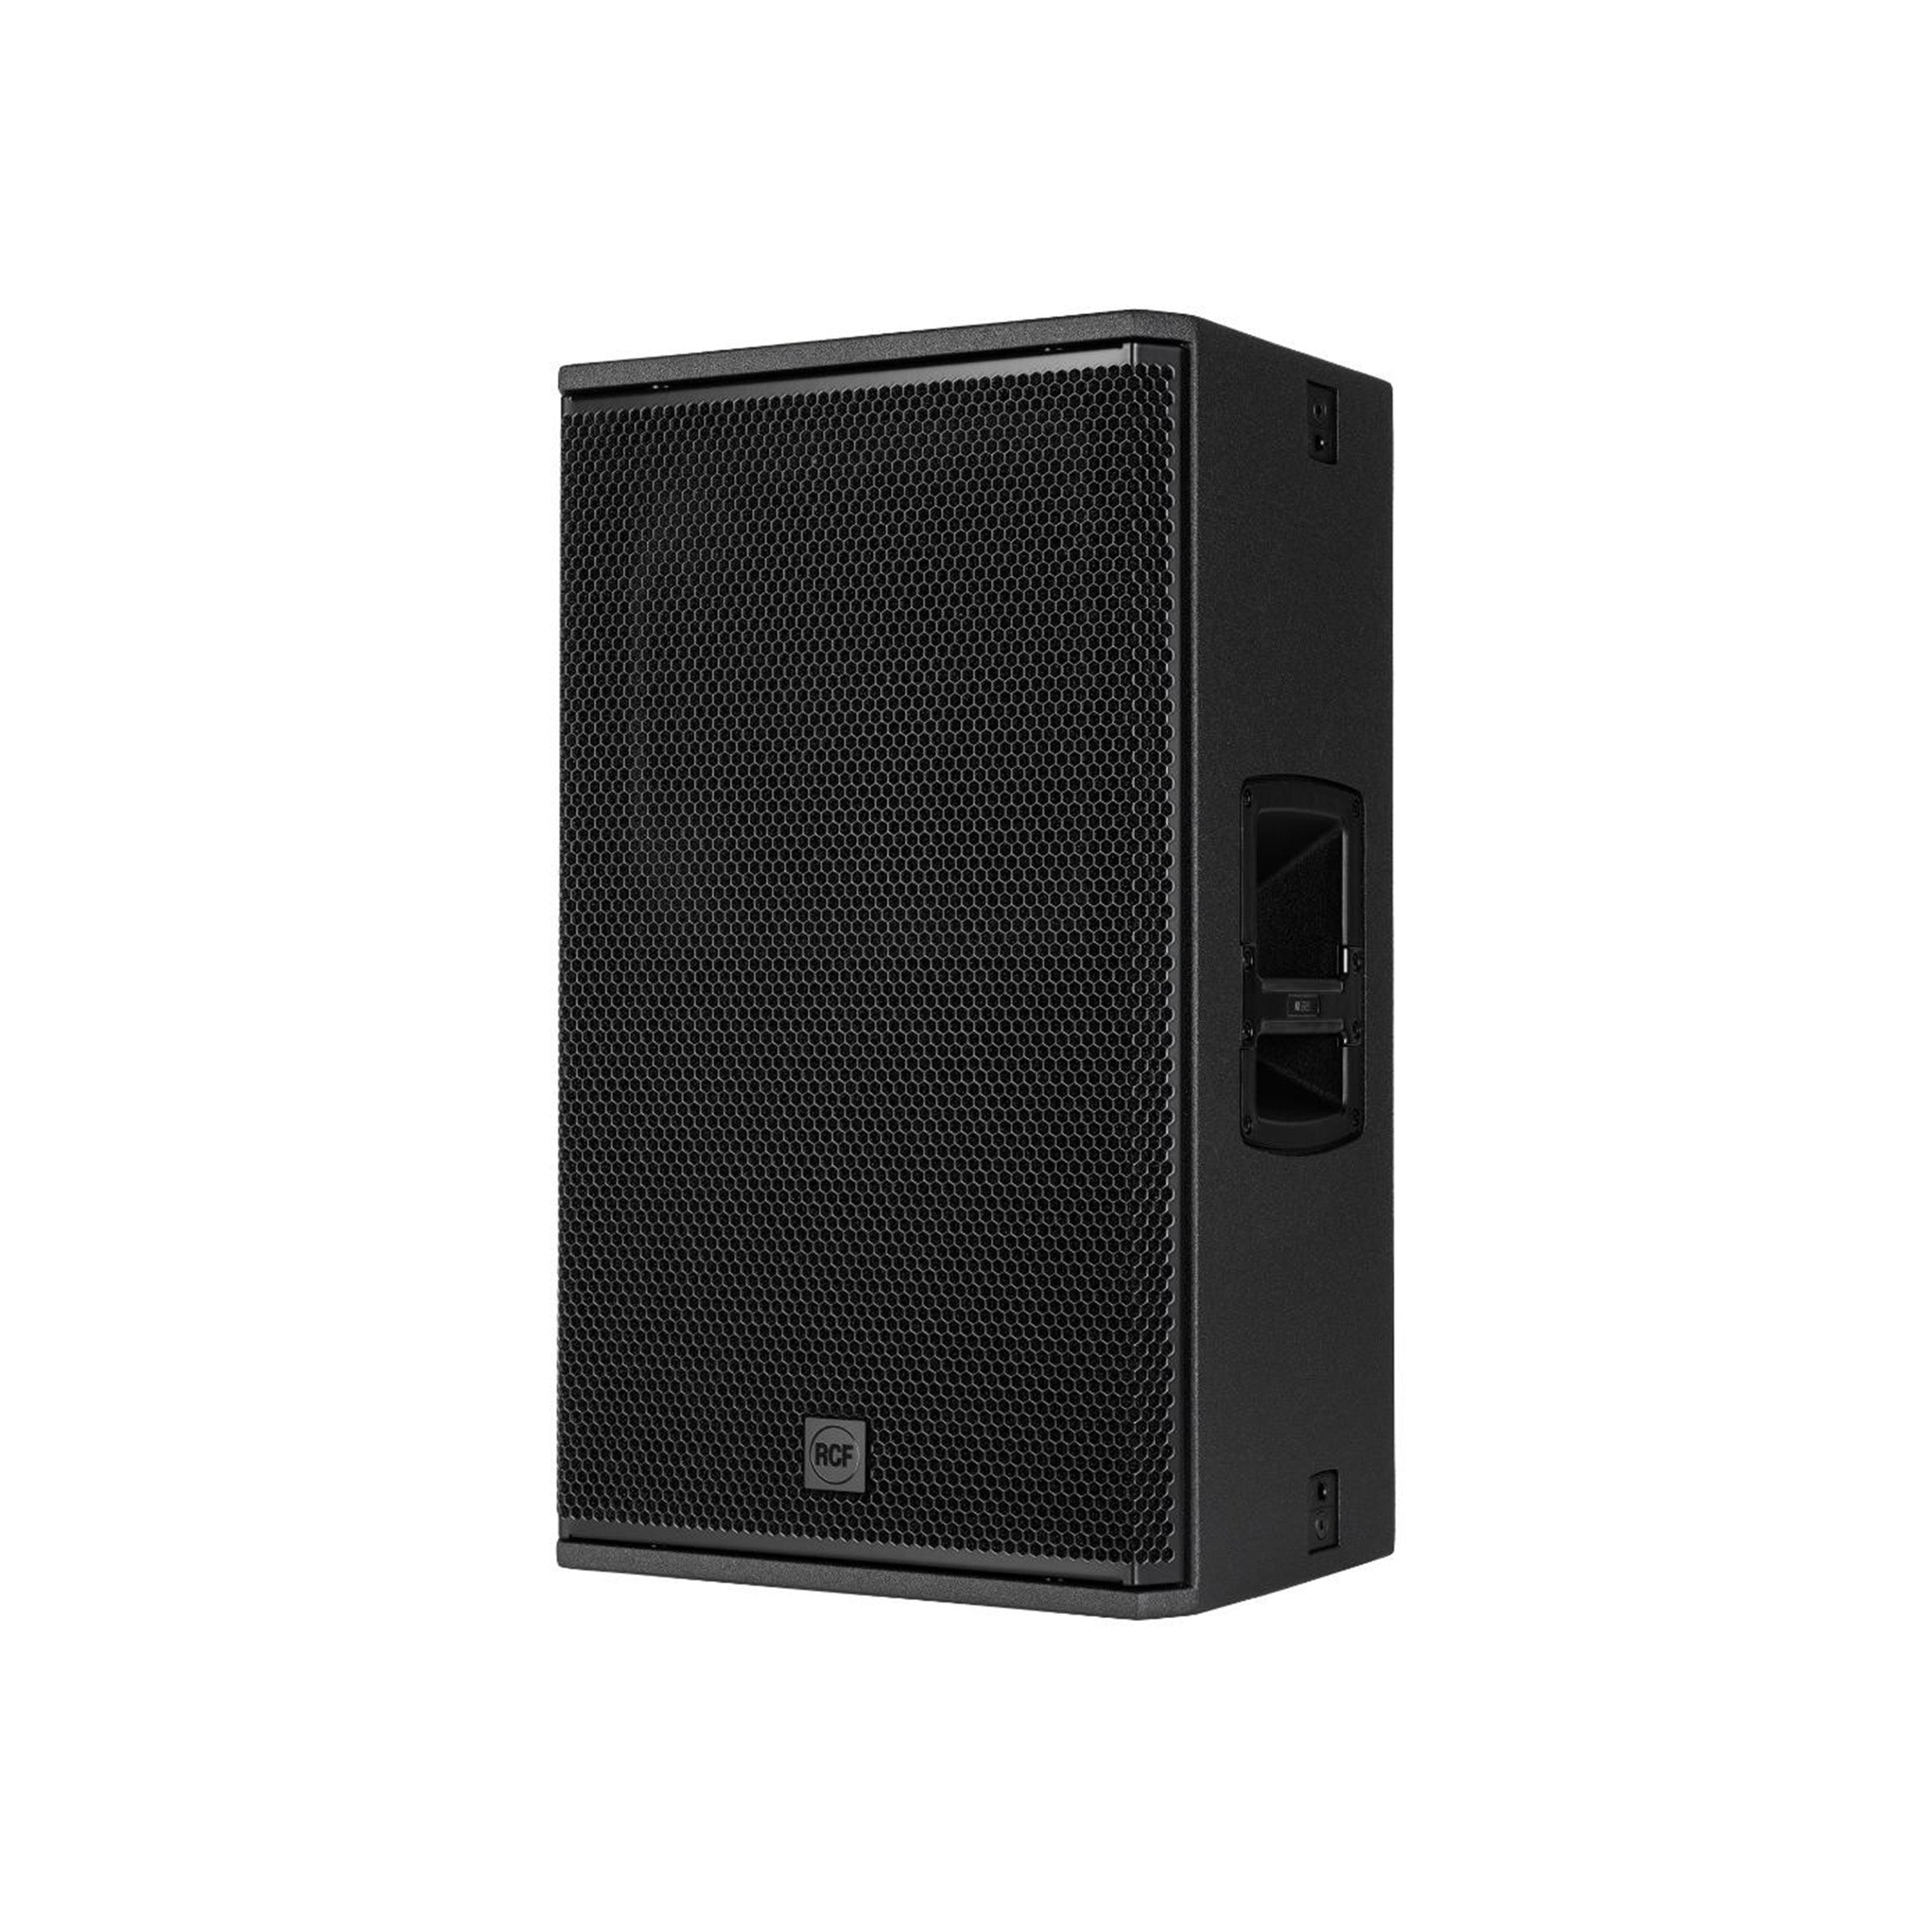 RCF NX 945-A Two-Way Active Speaker (Pair)